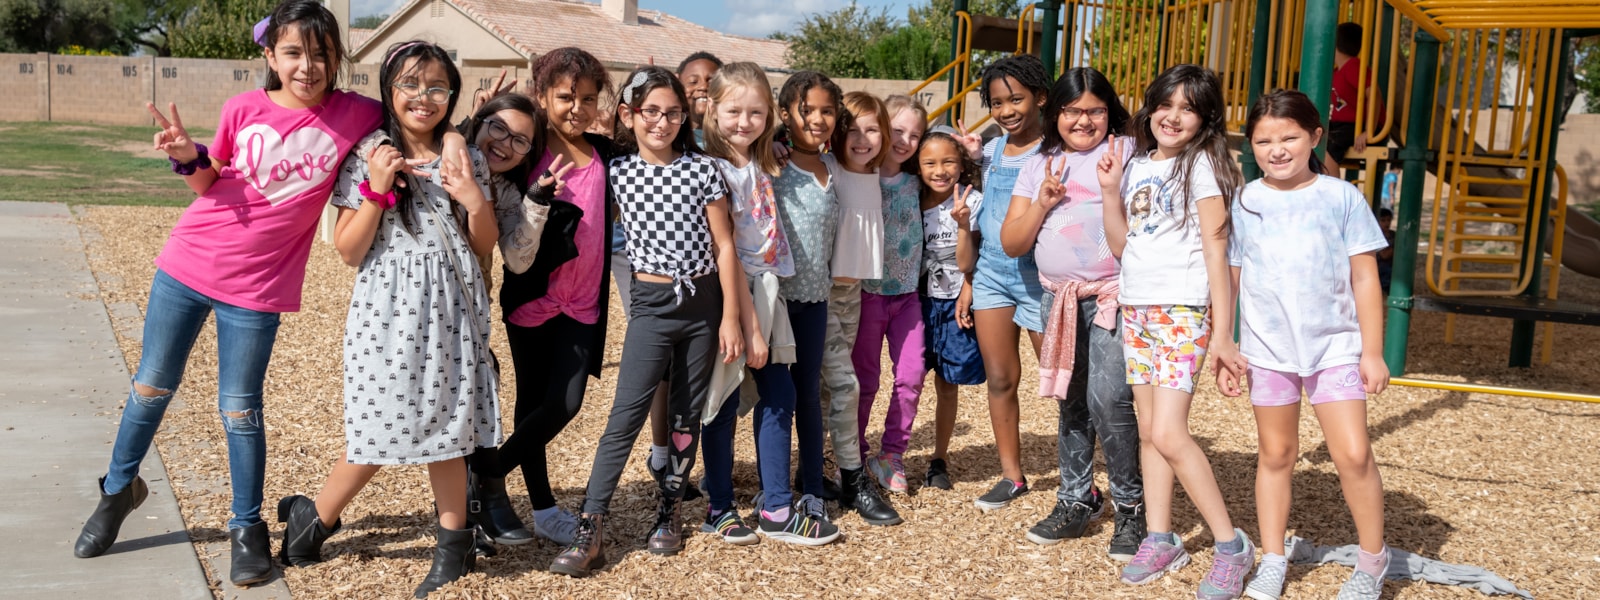 group of students smiling on playground